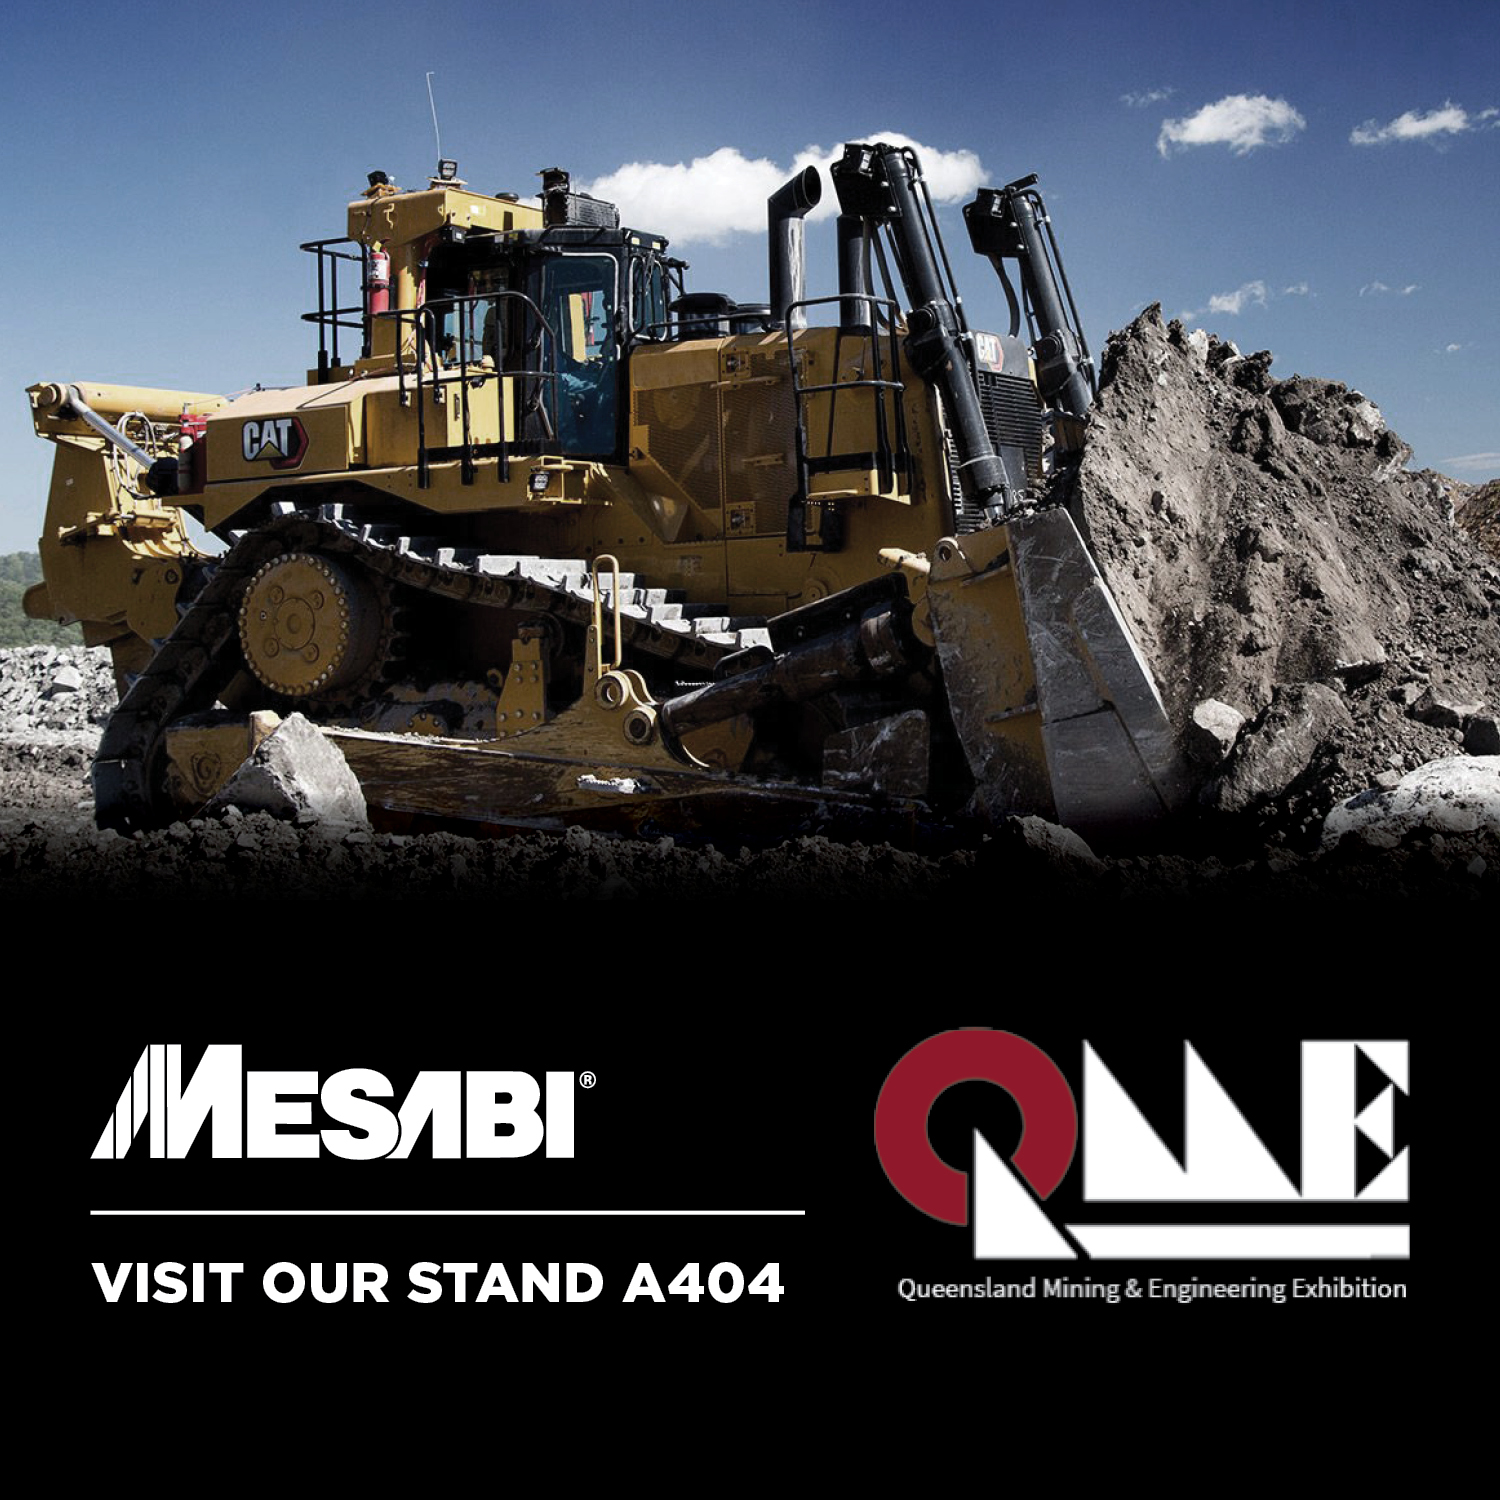 L&M Presents at the Queensland Mining & Engineering Exhibition